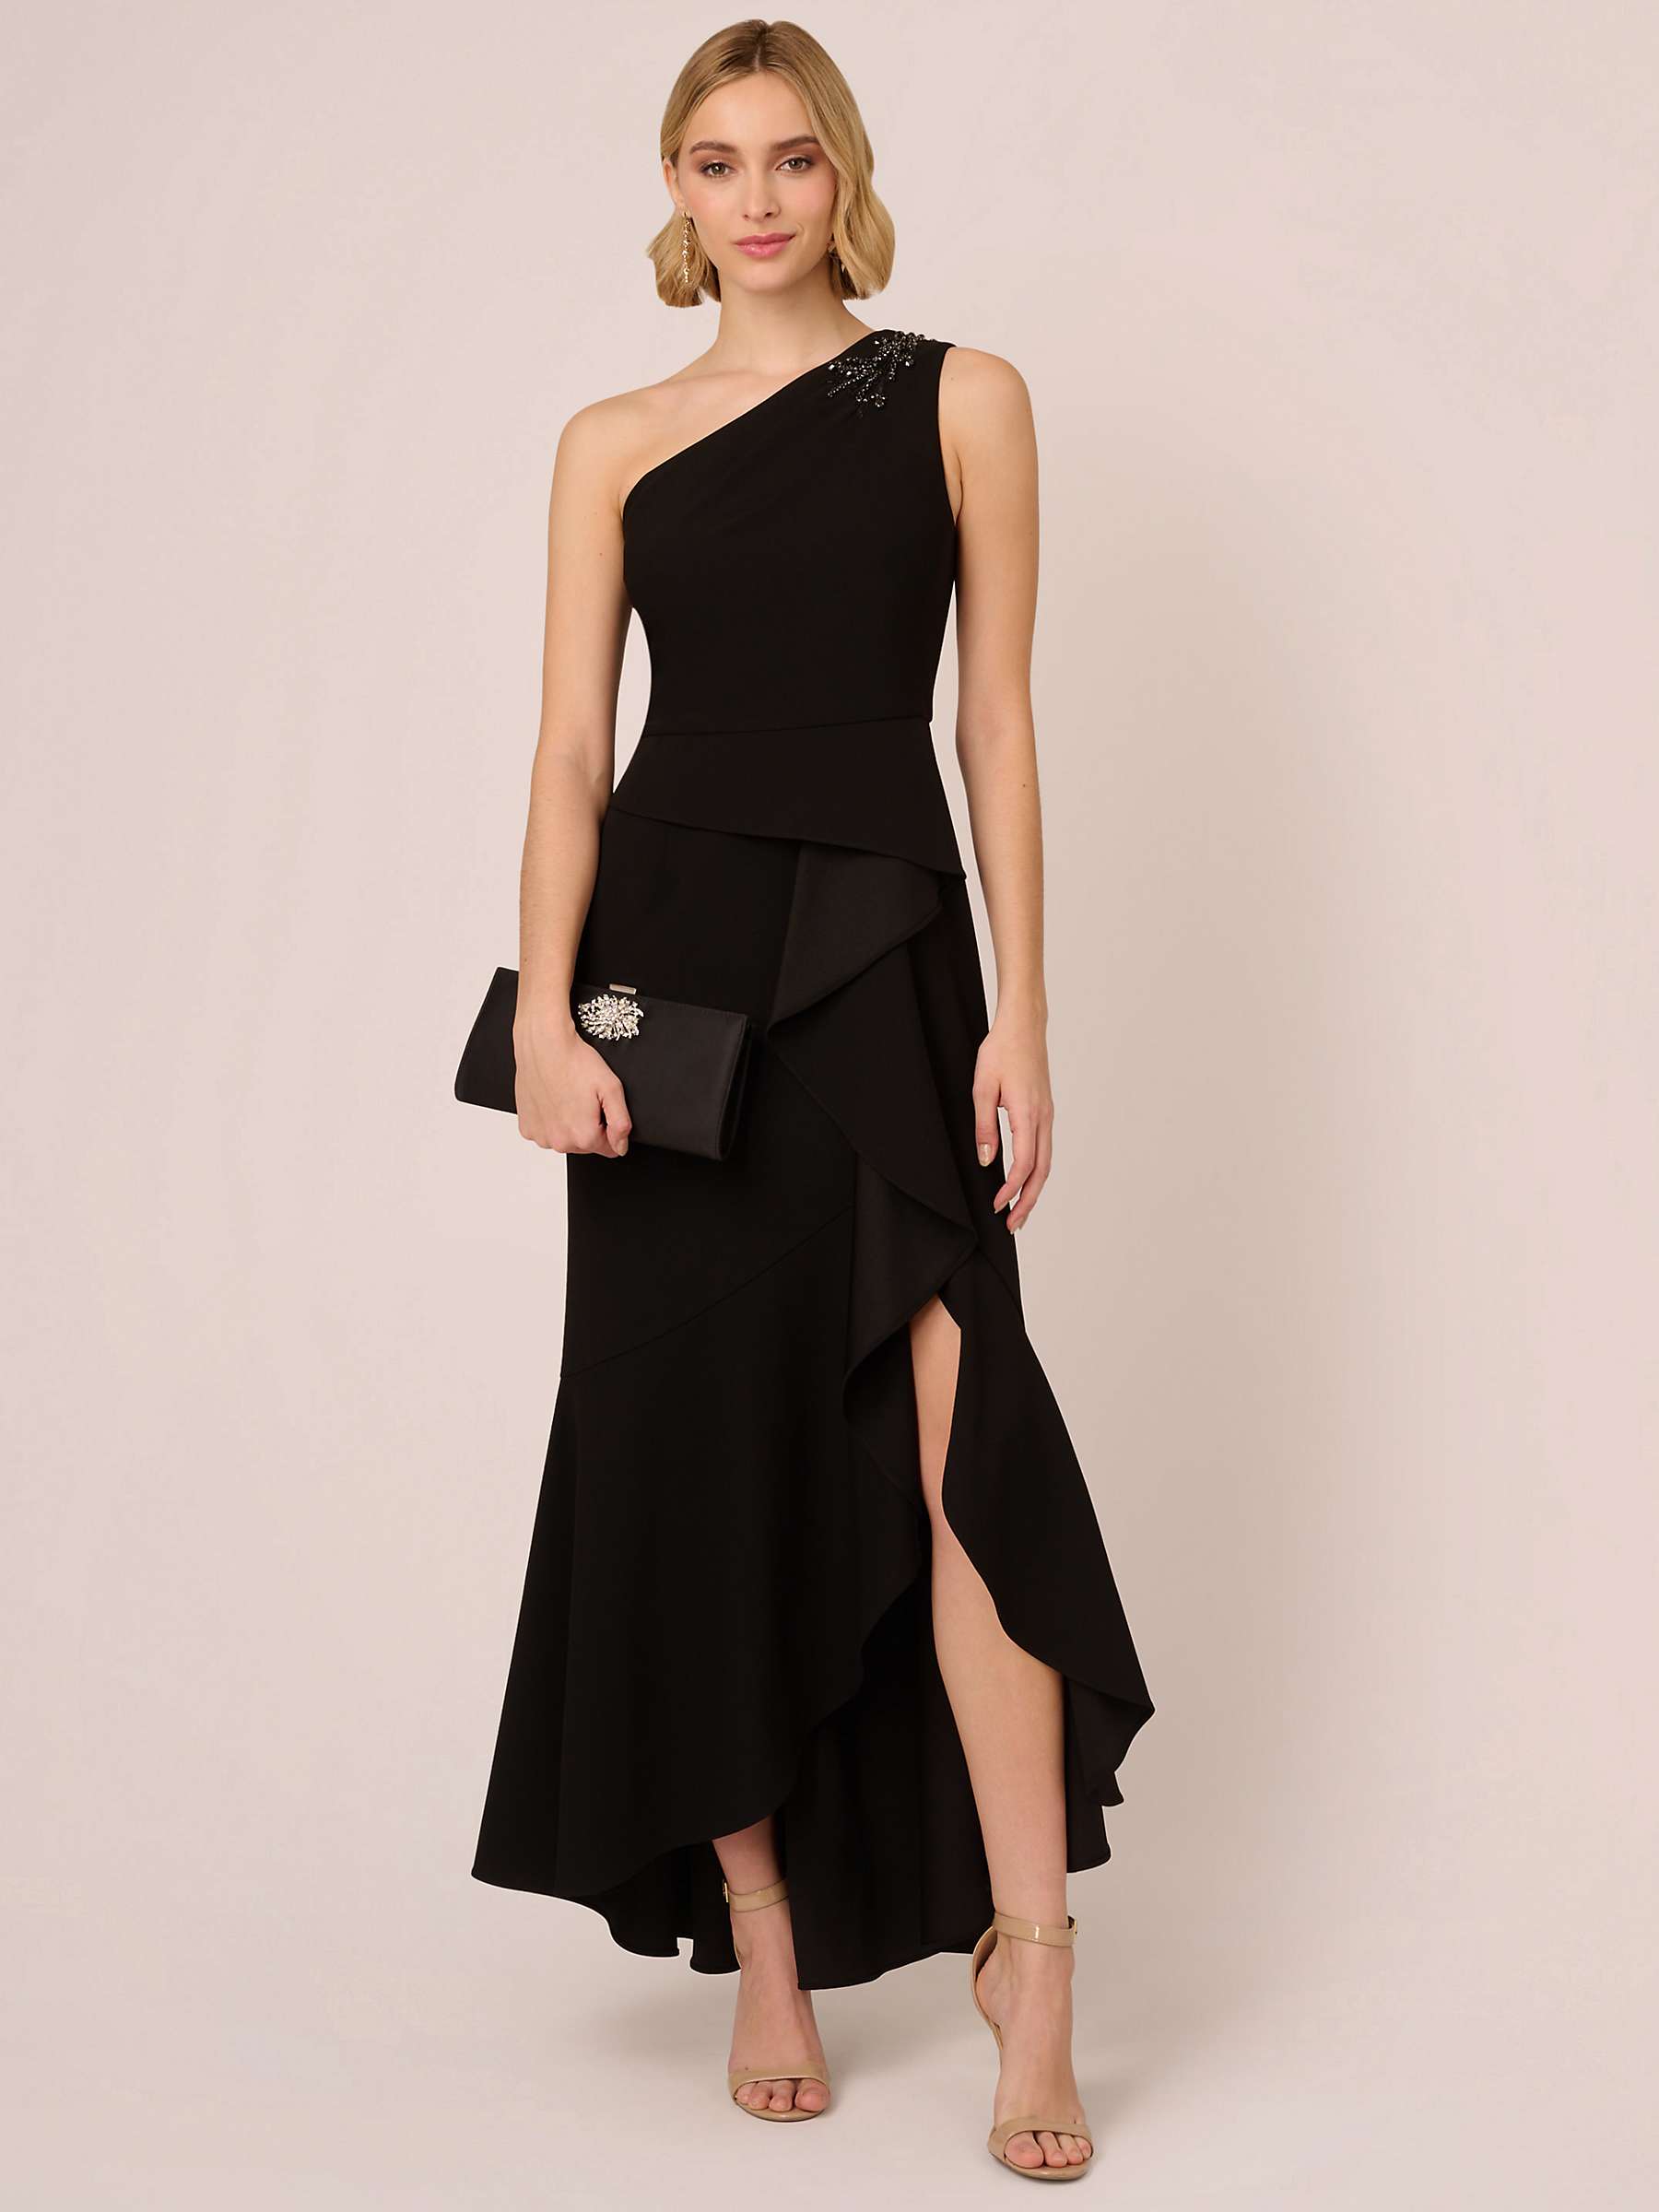 Buy Adrianna Papell Studio Beaded Knit Crepe Maxi Dress, Black Online at johnlewis.com